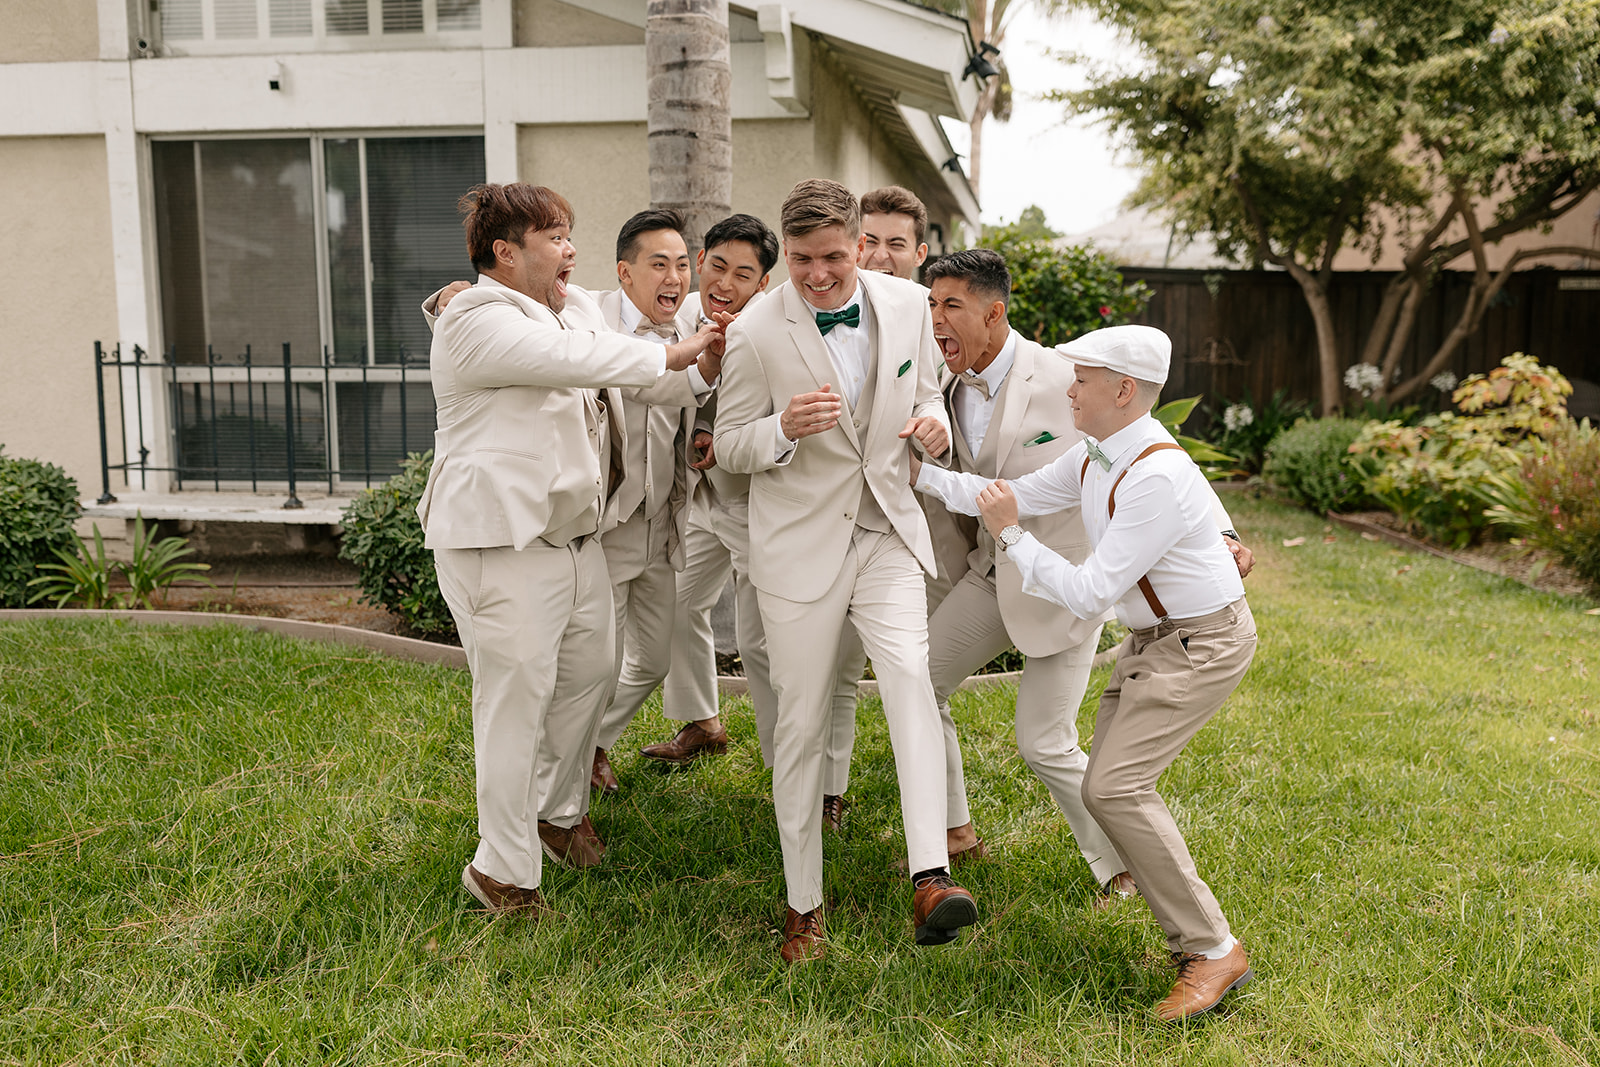 womens club wedding southern california laguna beach socal groomsmen pictures portraits silly wedding pictures